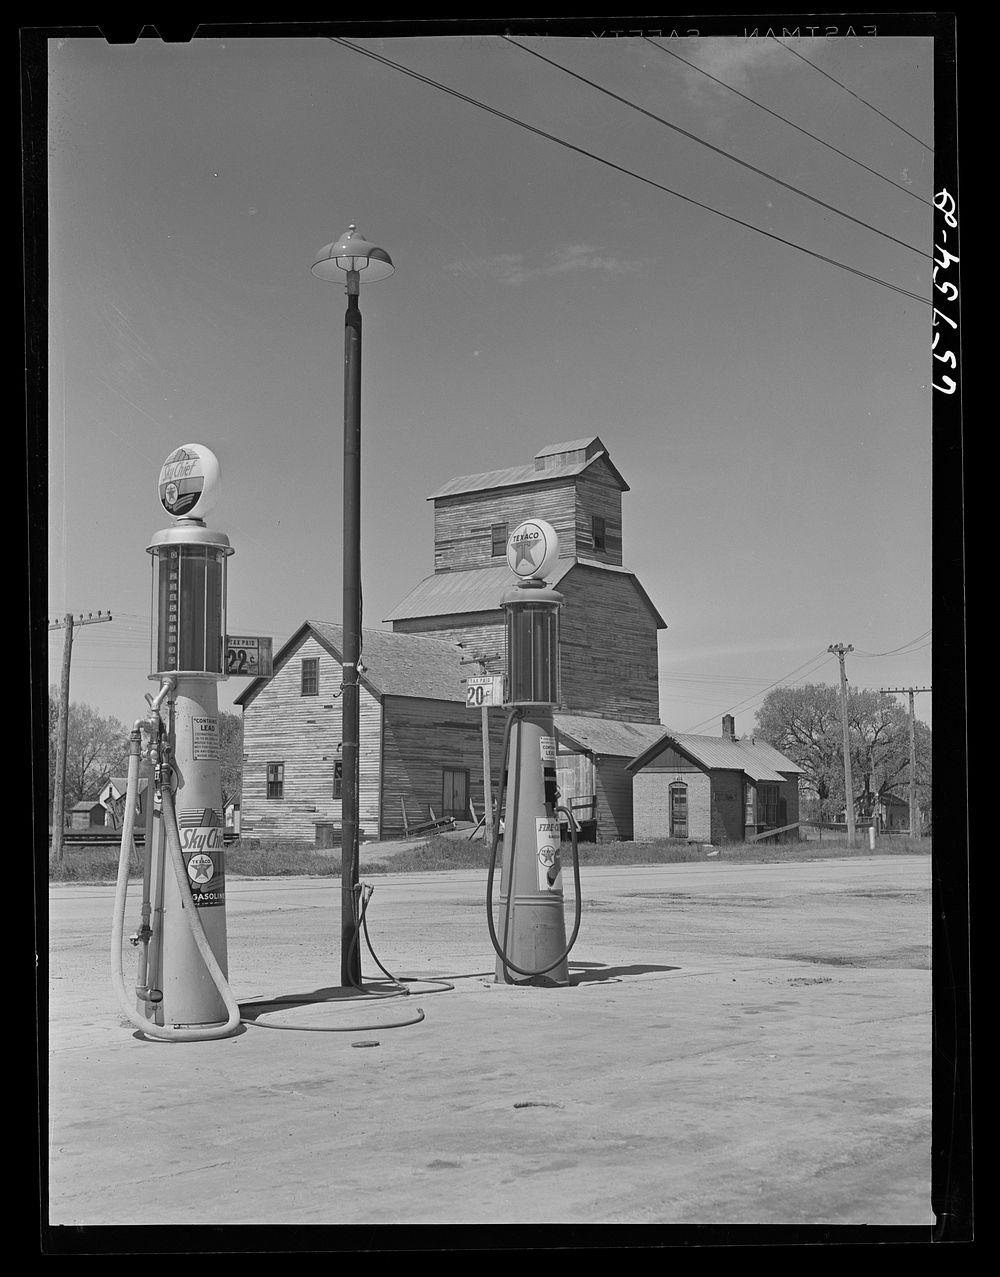 Gothenburg, Nebraska. Gas station and grain elevator. Sourced from the Library of Congress.